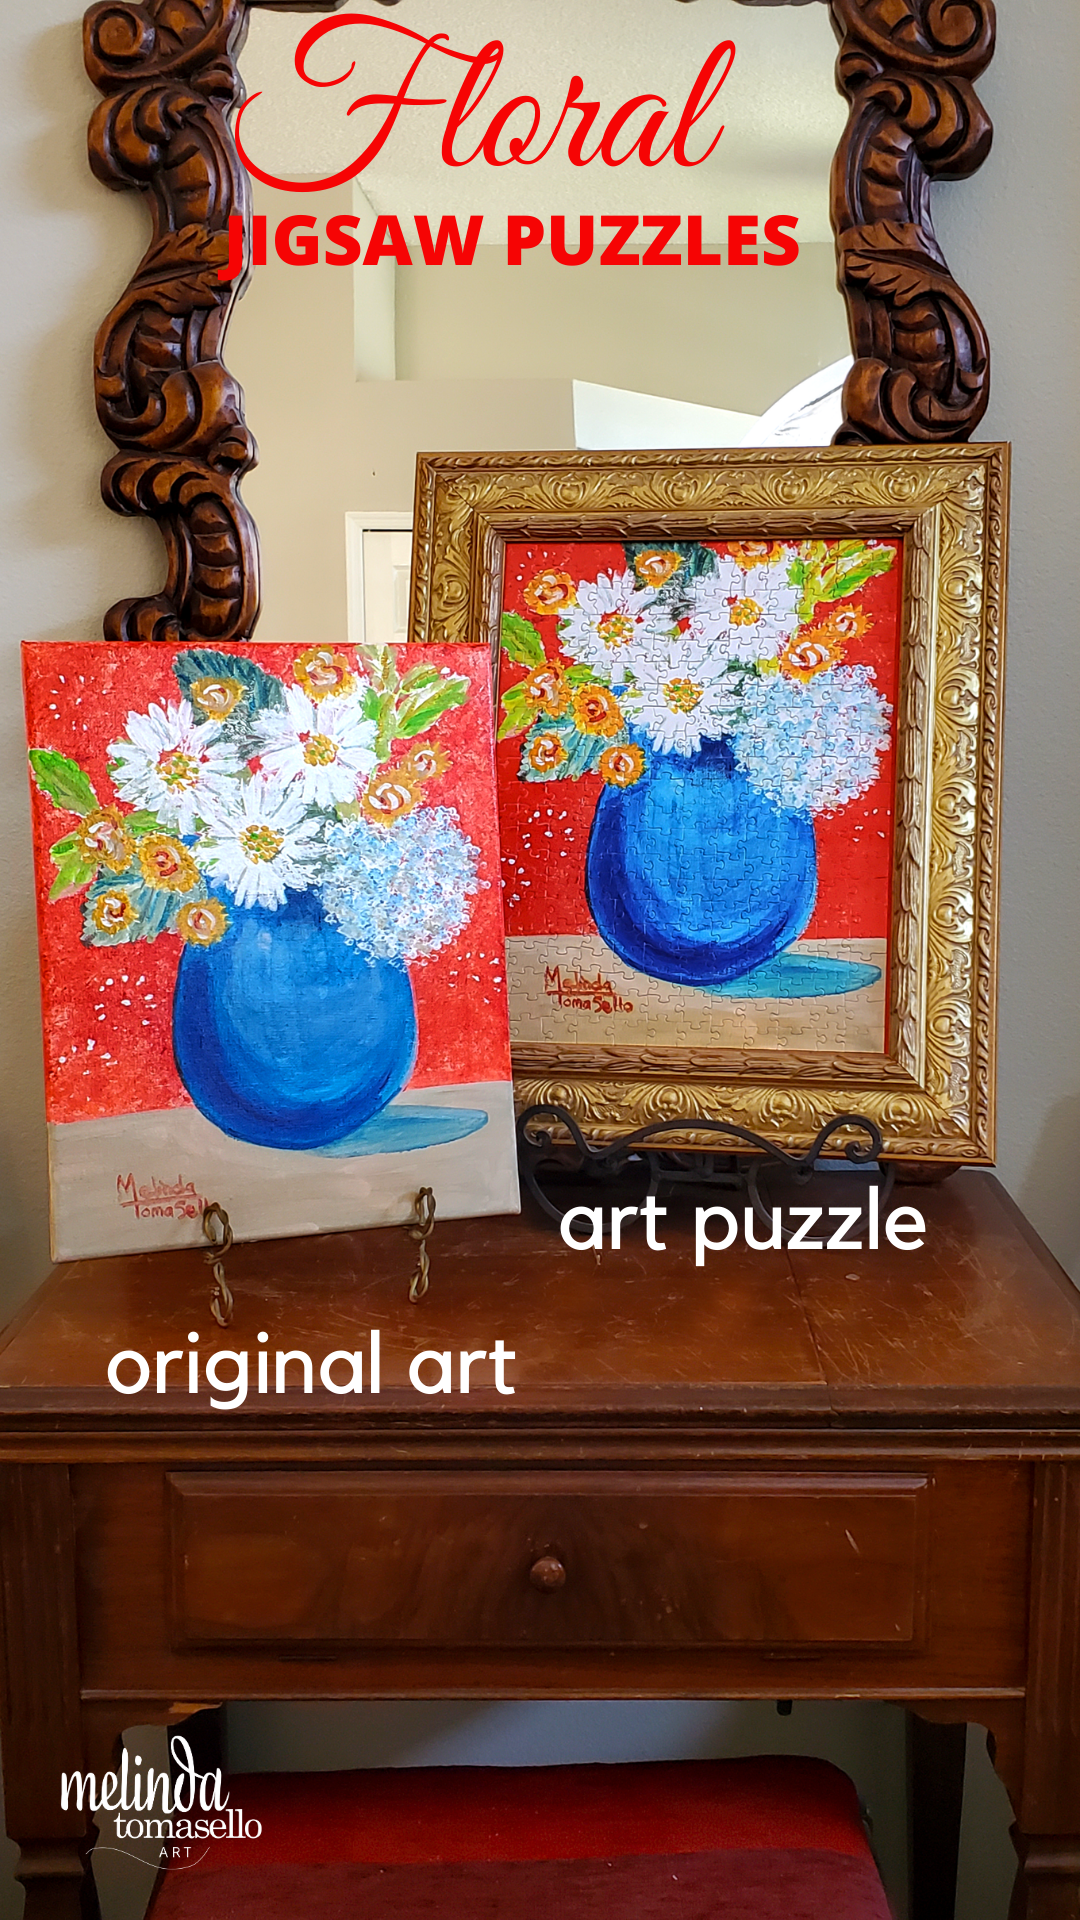 DIY tutorial of art puzzle and fine art piece photographed together